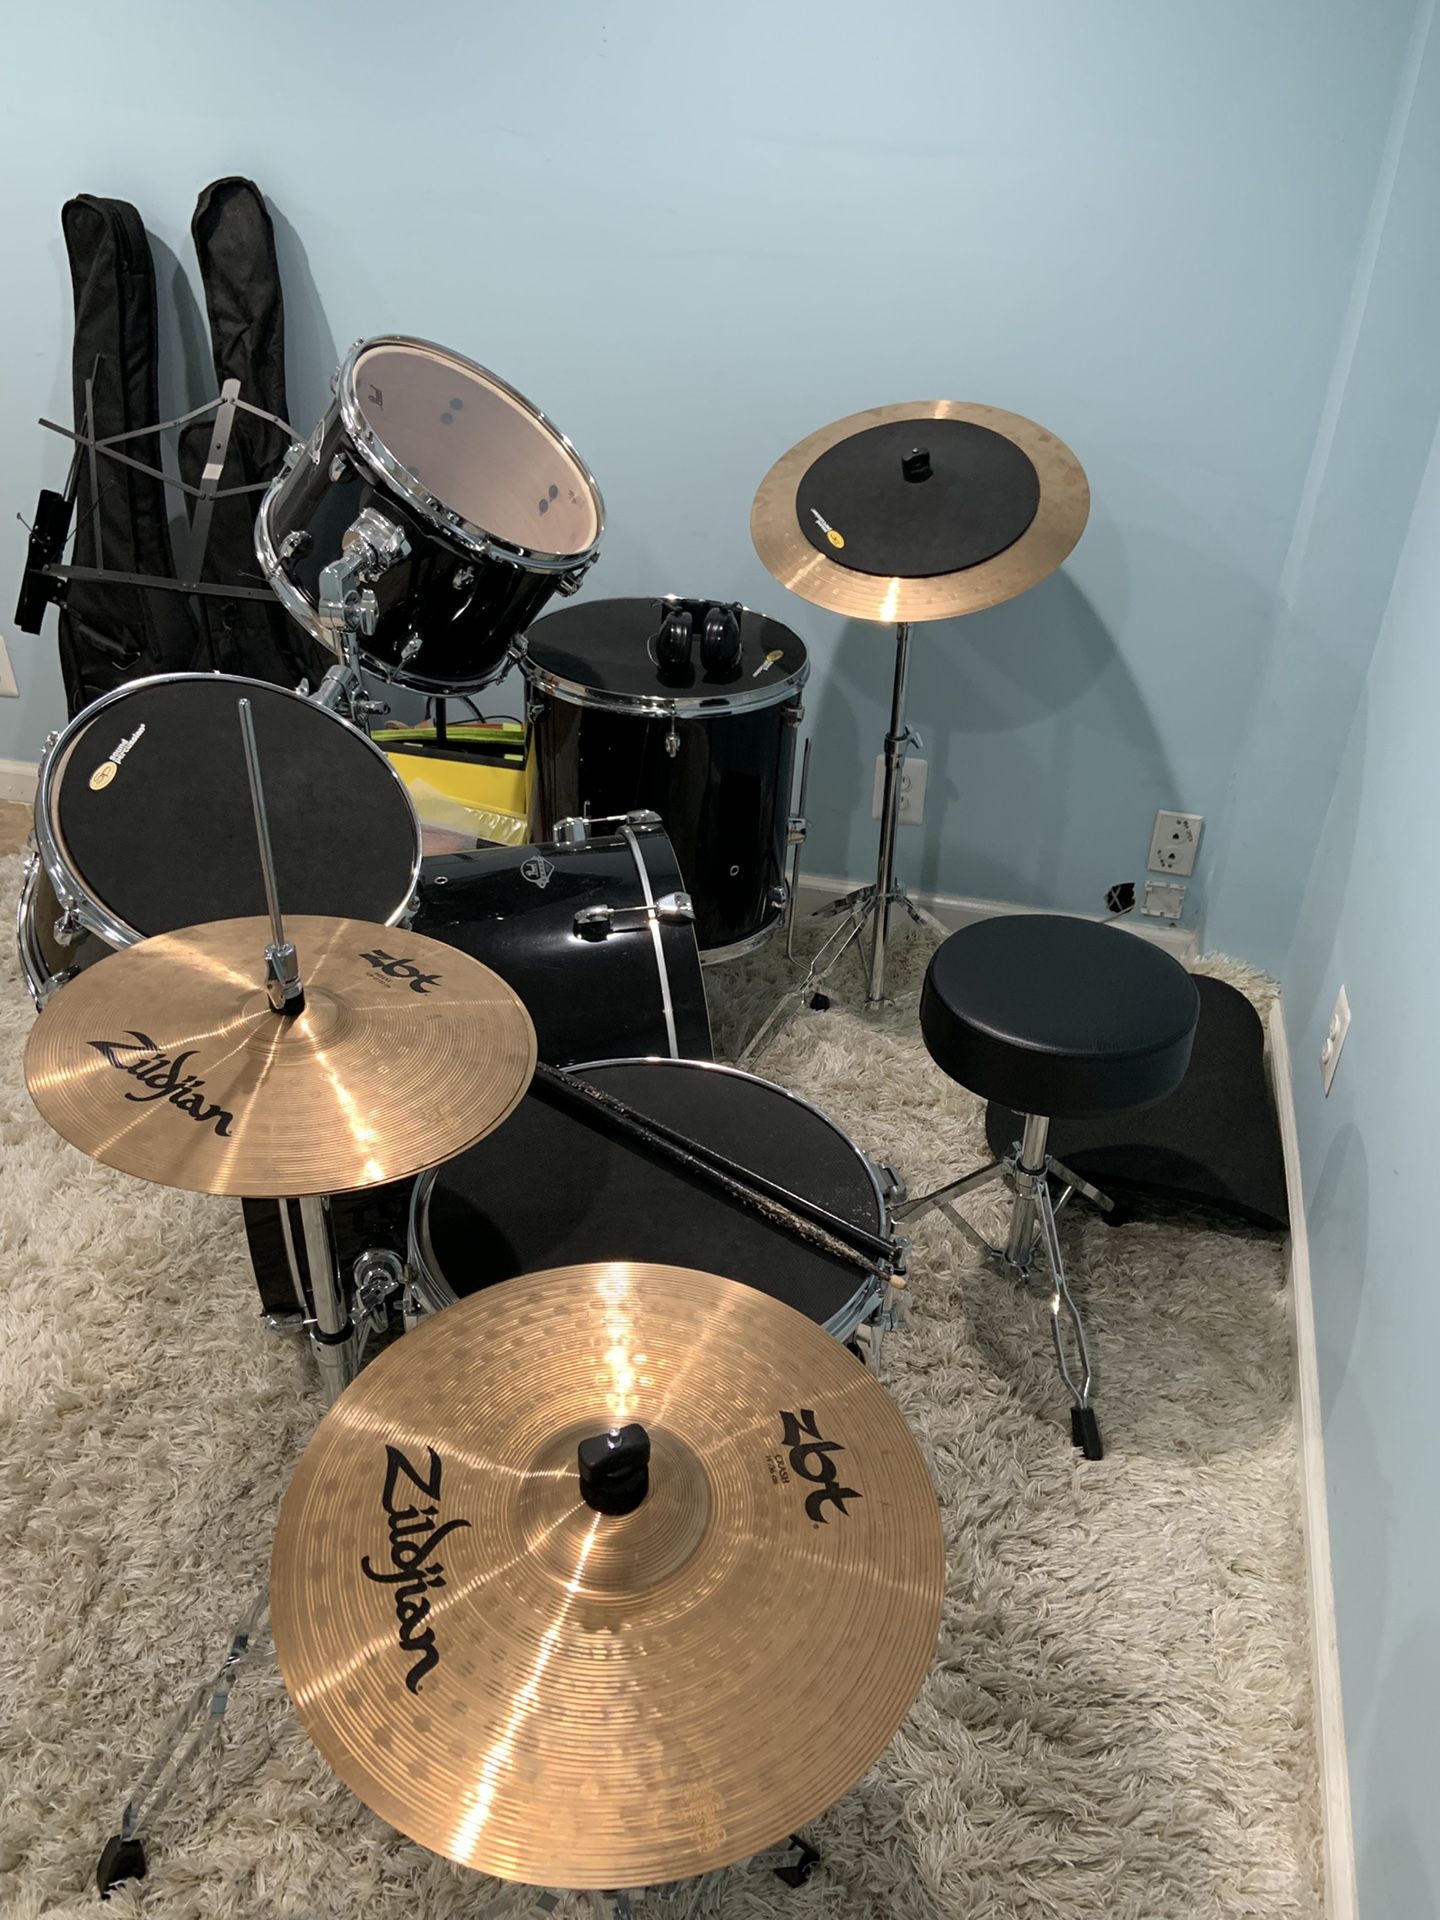 Pearl export series drum set with Zildjian symbols, seat and drum sticks. Excellent condition, only used for 6 months.